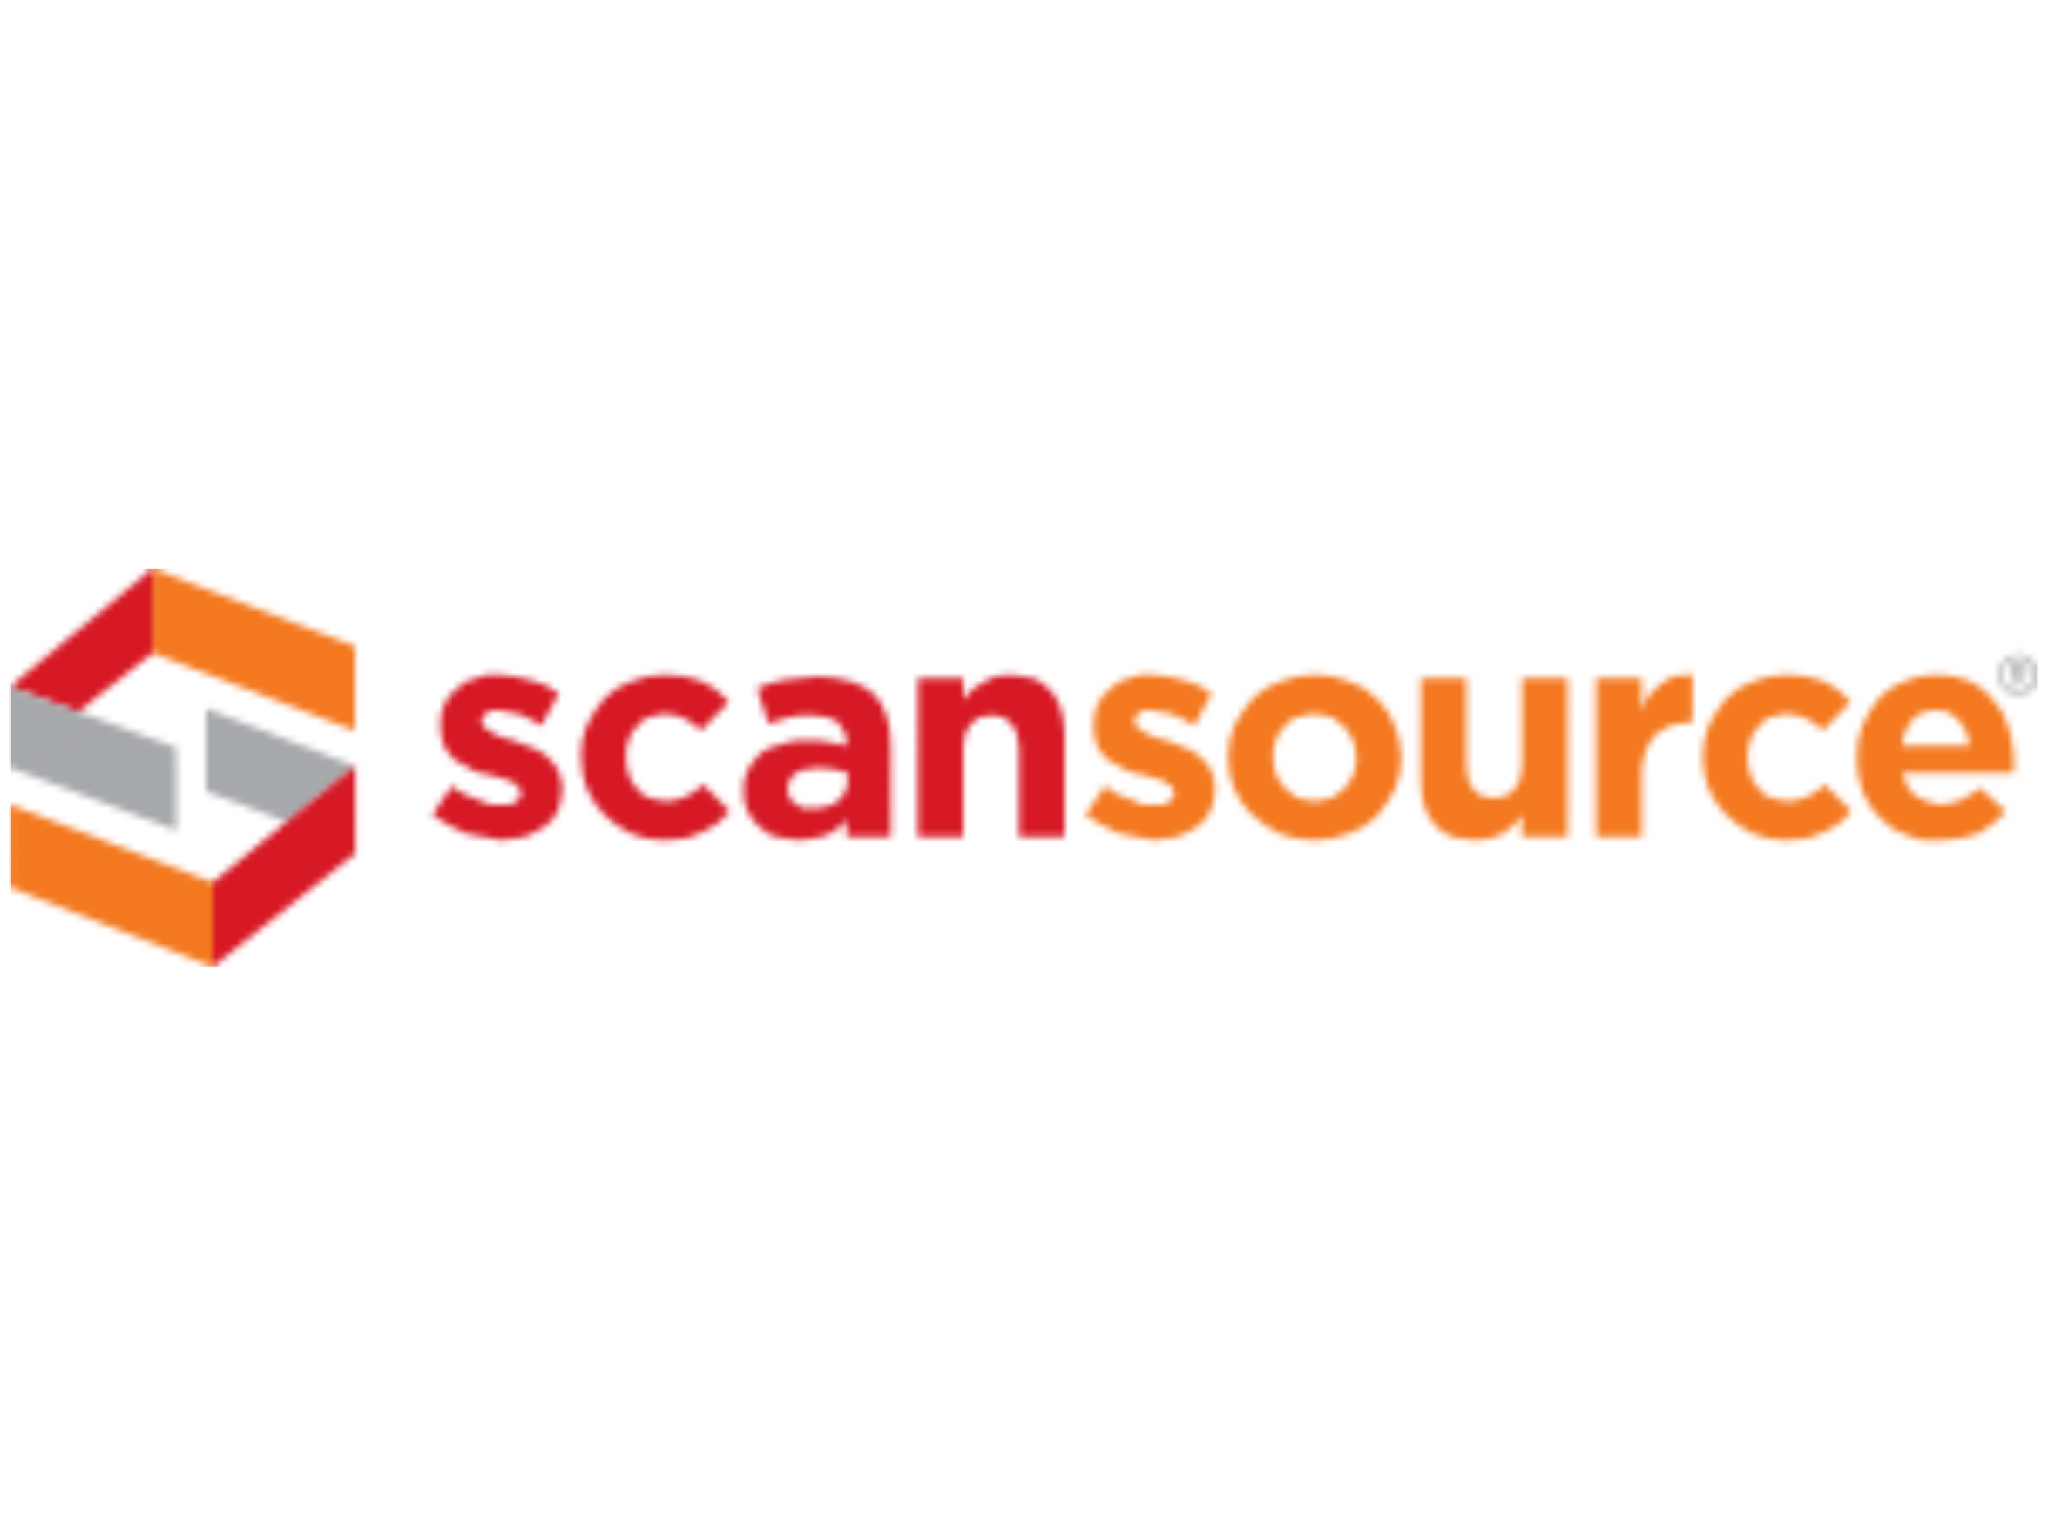  scansource-q4-earnings-beat-estimates-plans-working-capital-optimization-to-reach-margin-expectations 